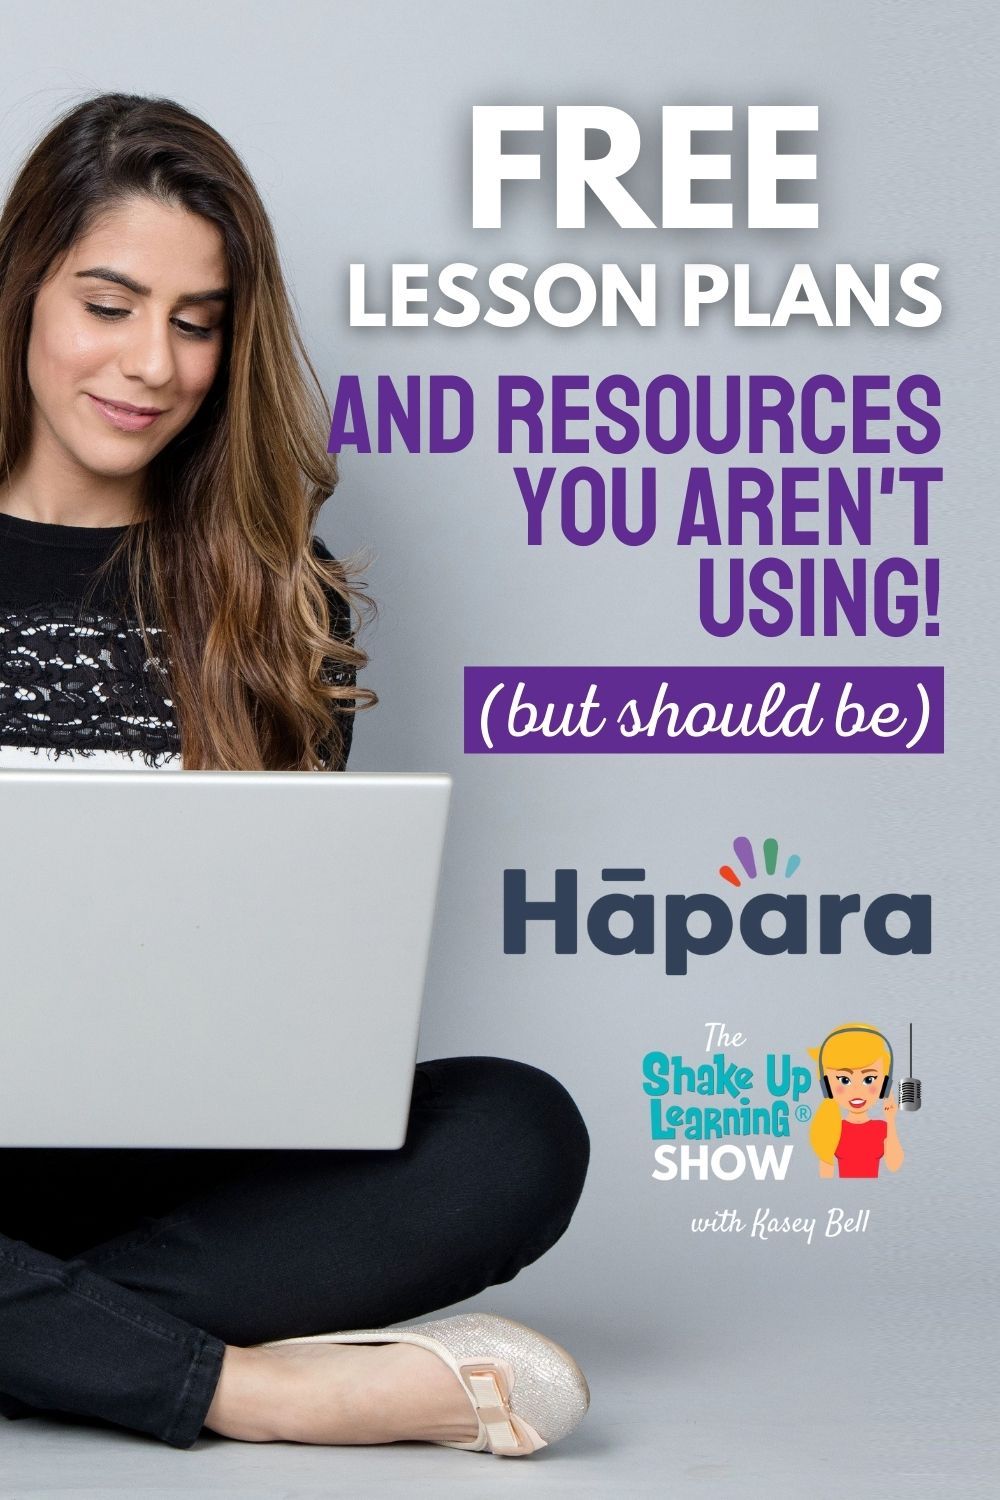 148: The FREE Lesson Plans and Resources You Aren't Using! (but should be) [interview with Rich Dixon]